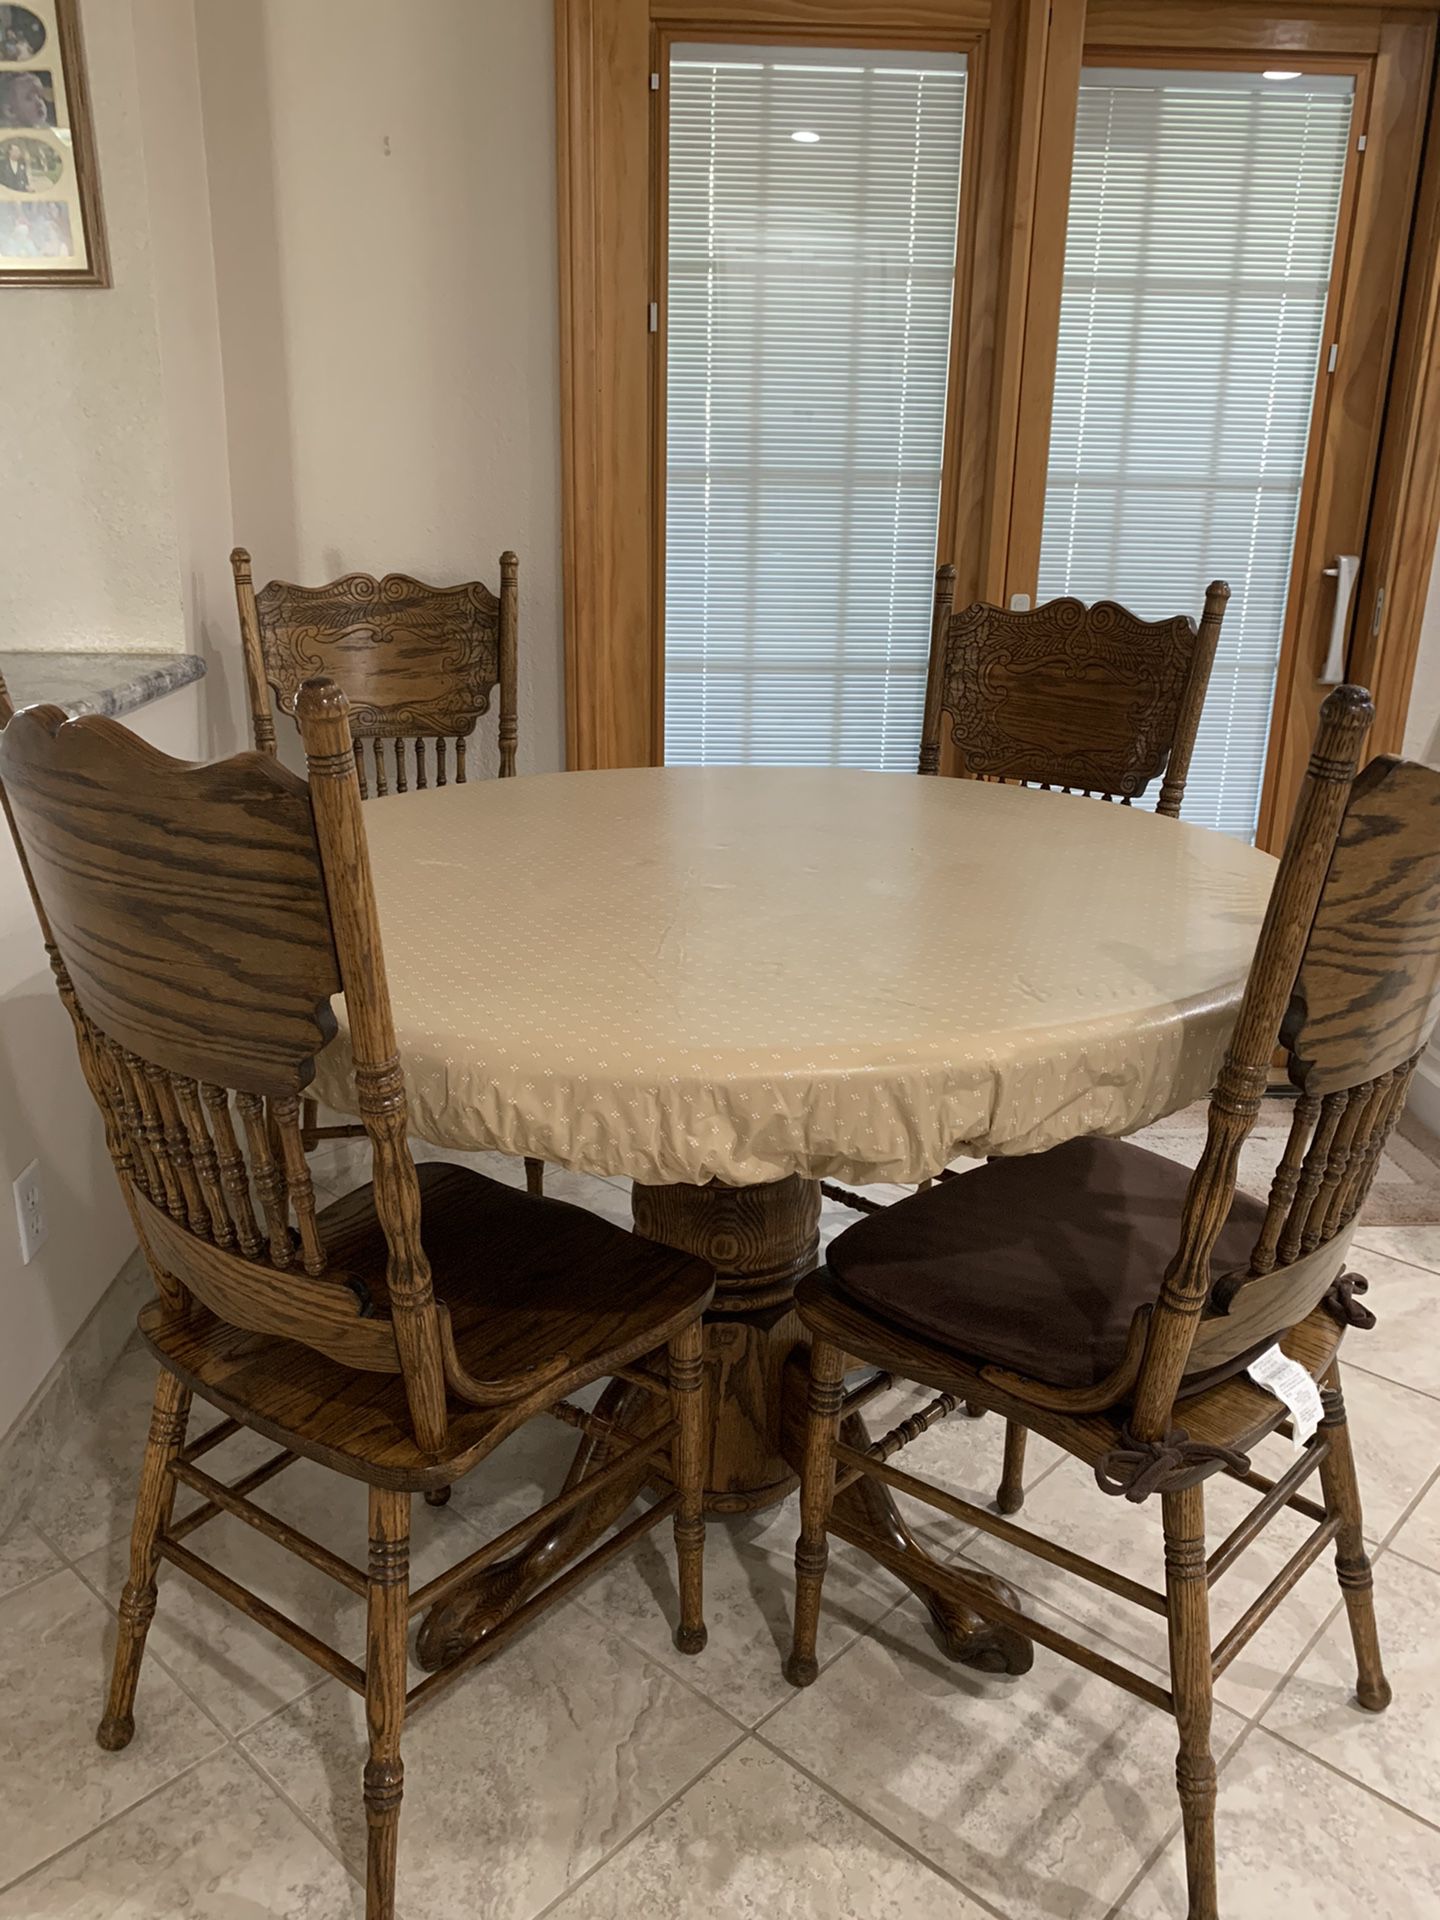 Clawfoot pedestal table and chairs